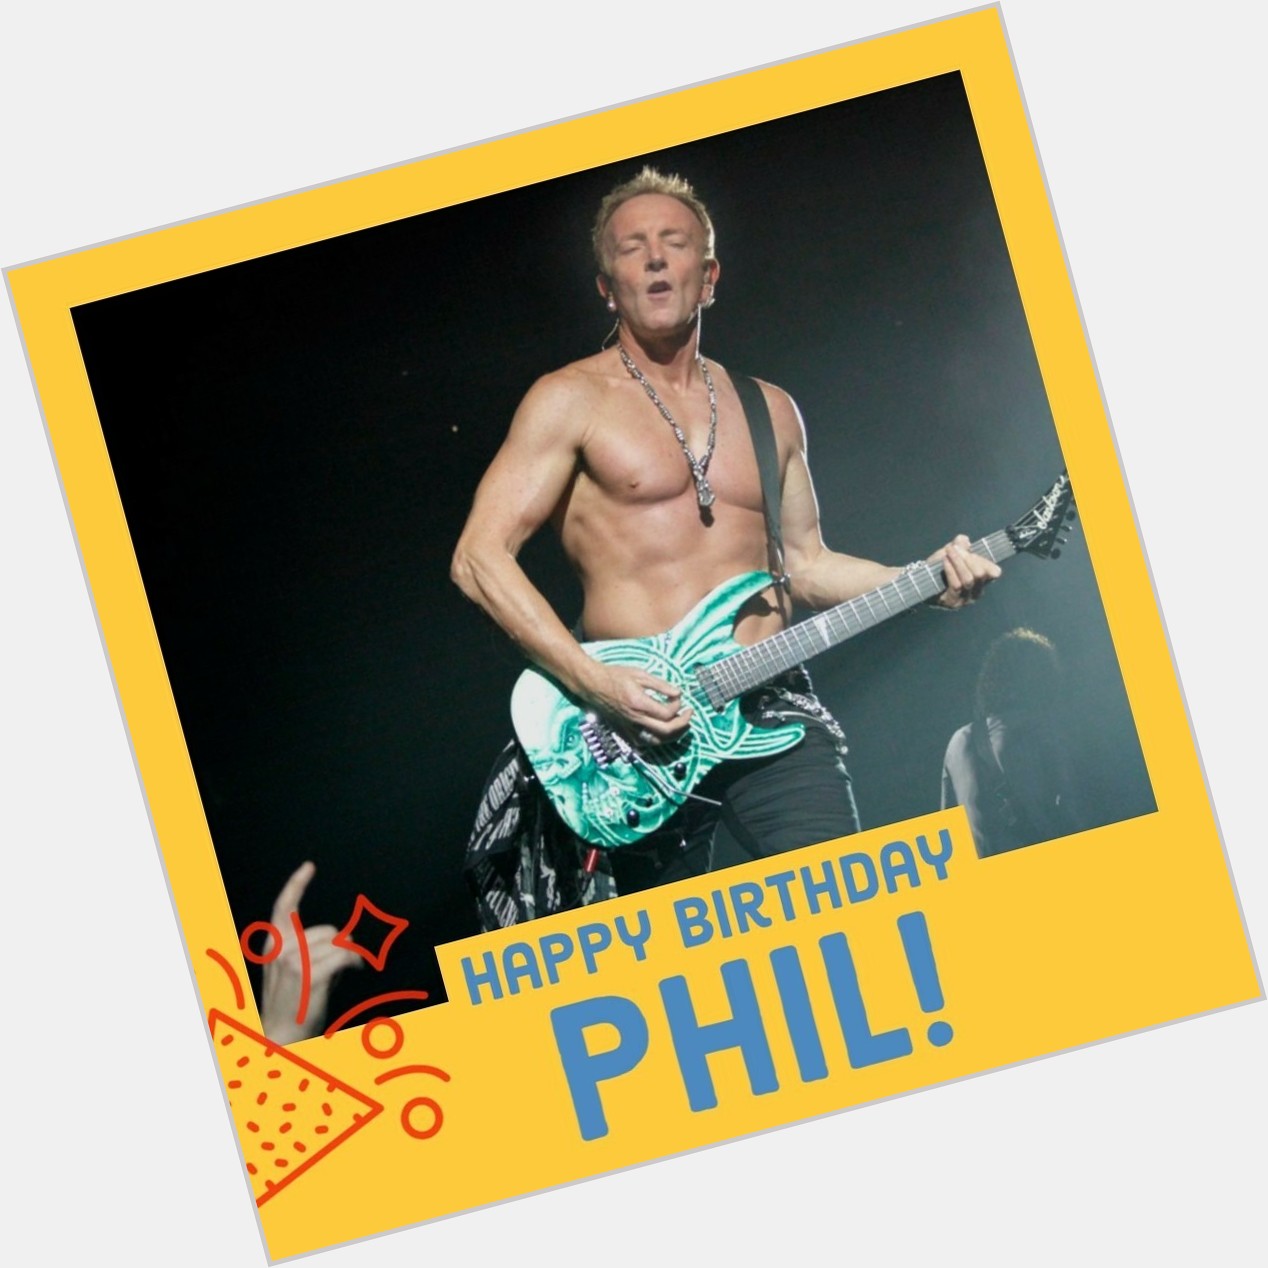 Happy Birthday Phil Collen!

We are honored to have Def Leppard as a member of the Hard Driver family 